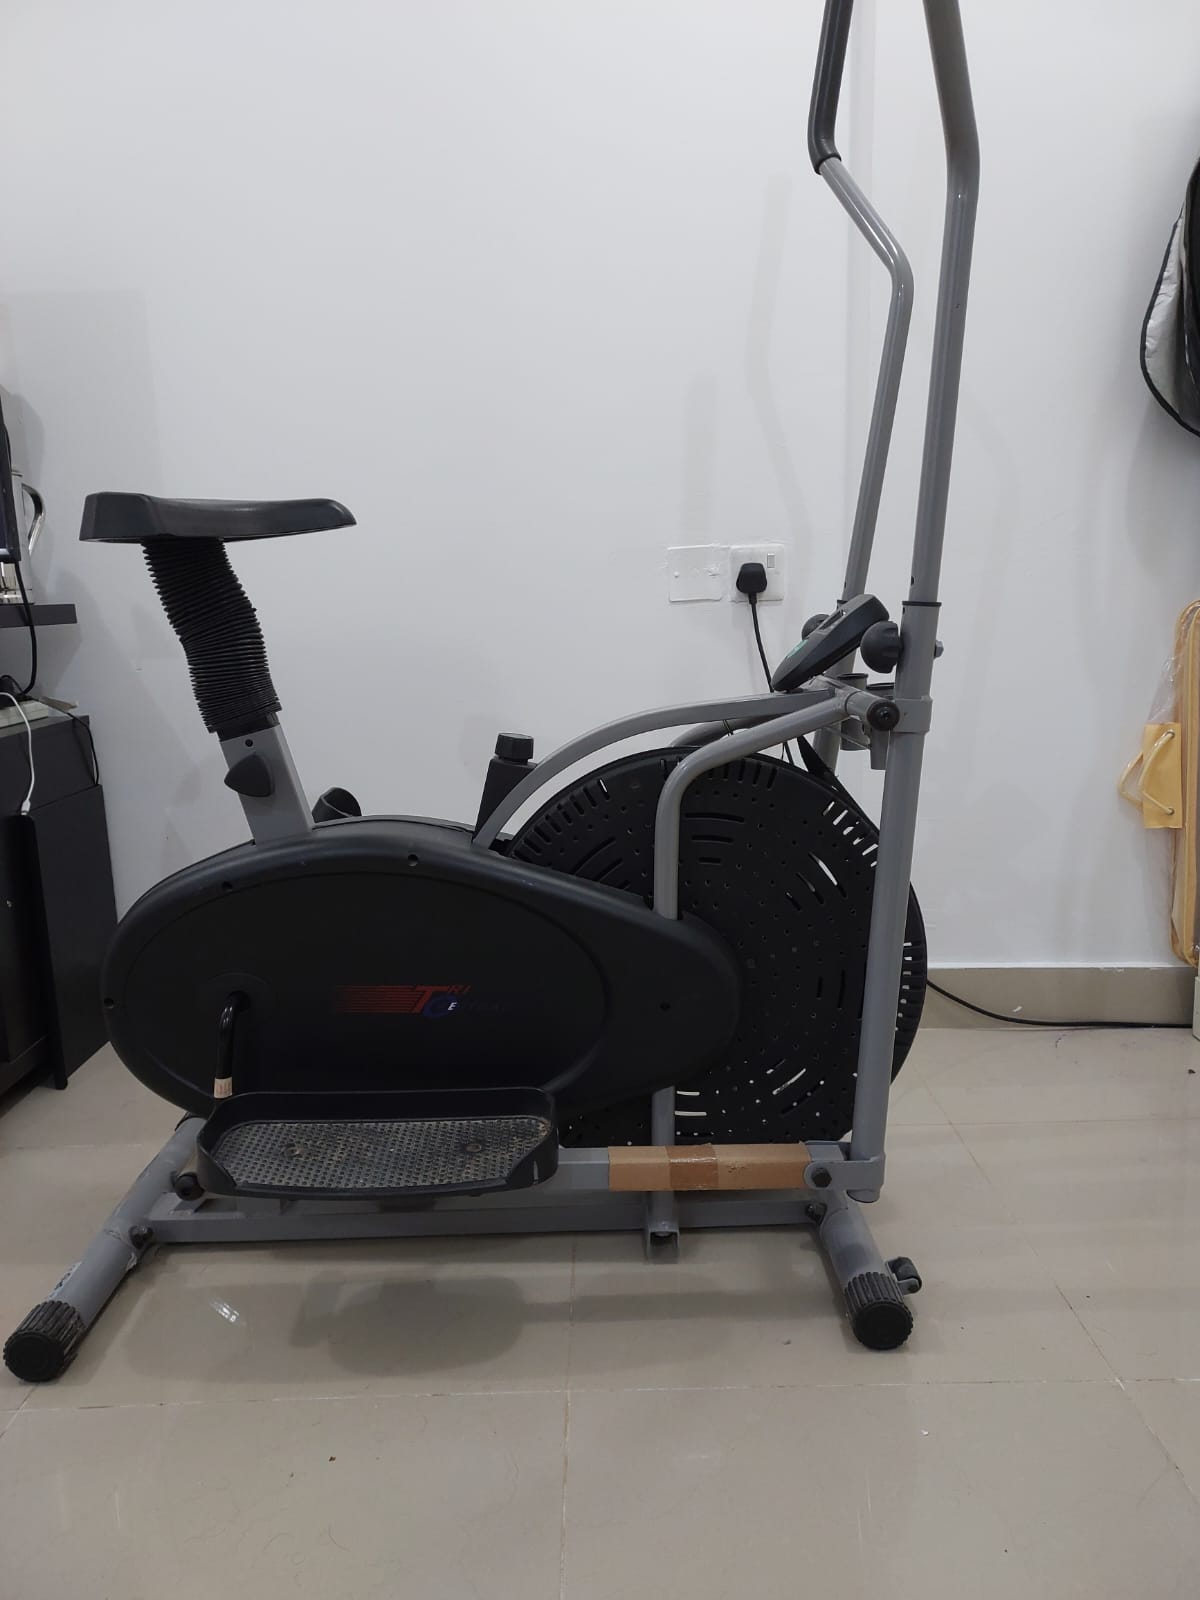 Excercise Cycle,TV Stand,Steel Cupboard 